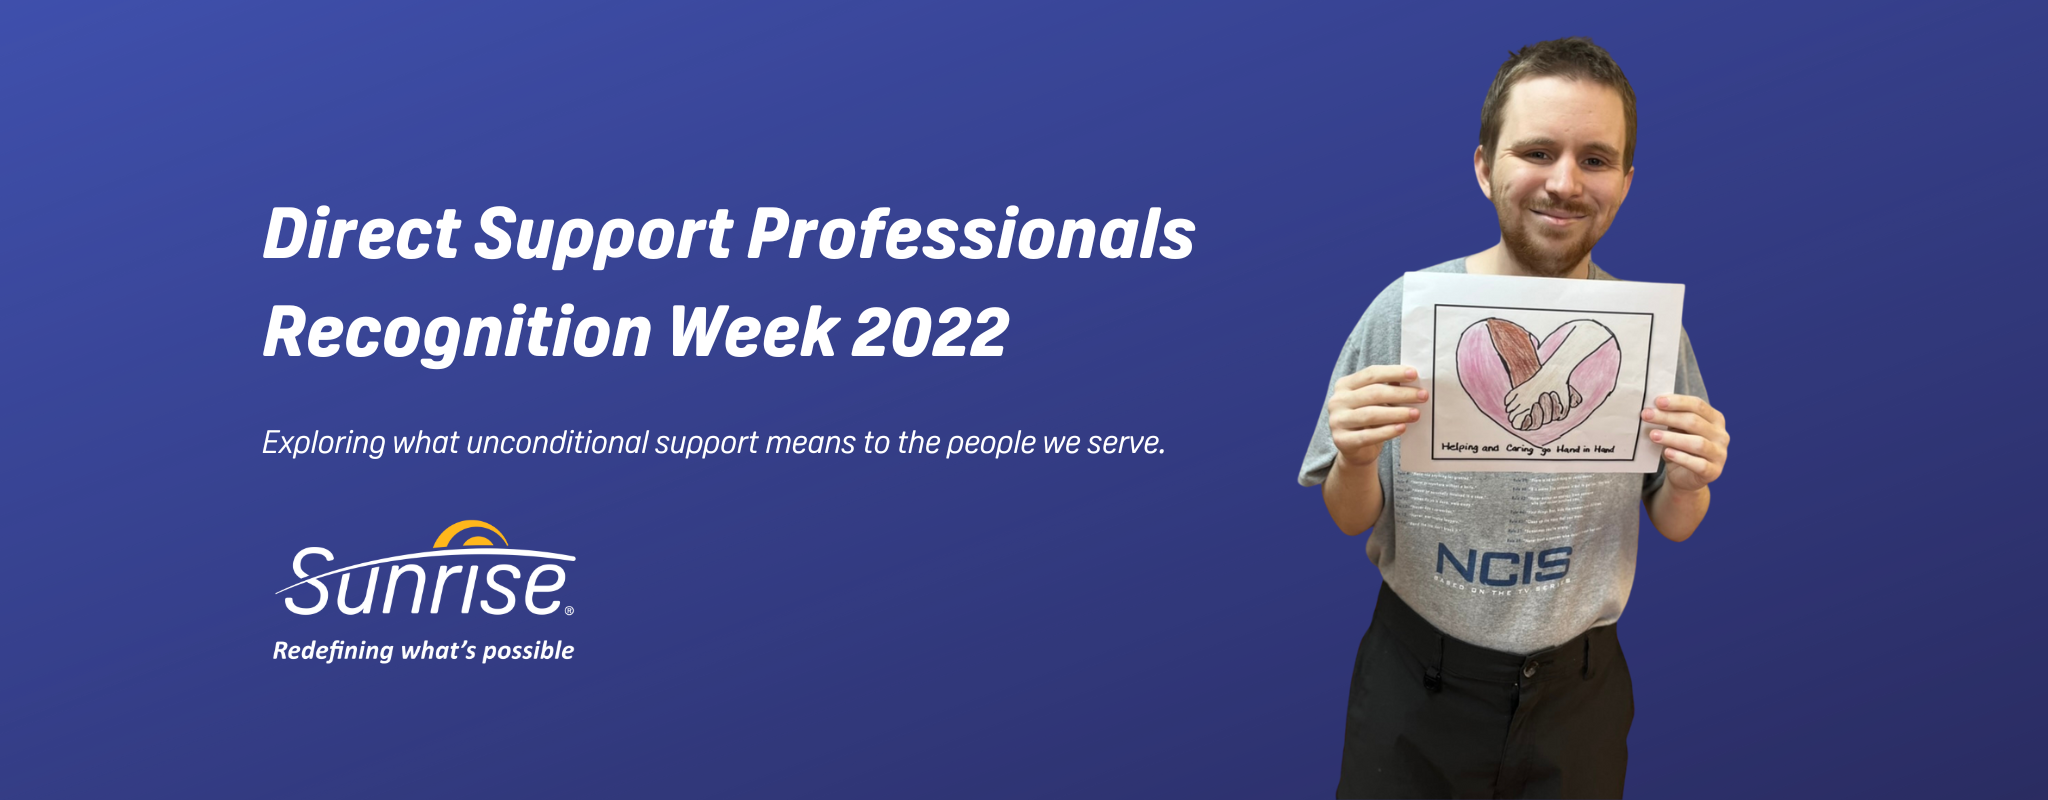 Celebrating Direct Support Professionals Recognition Week in 2022